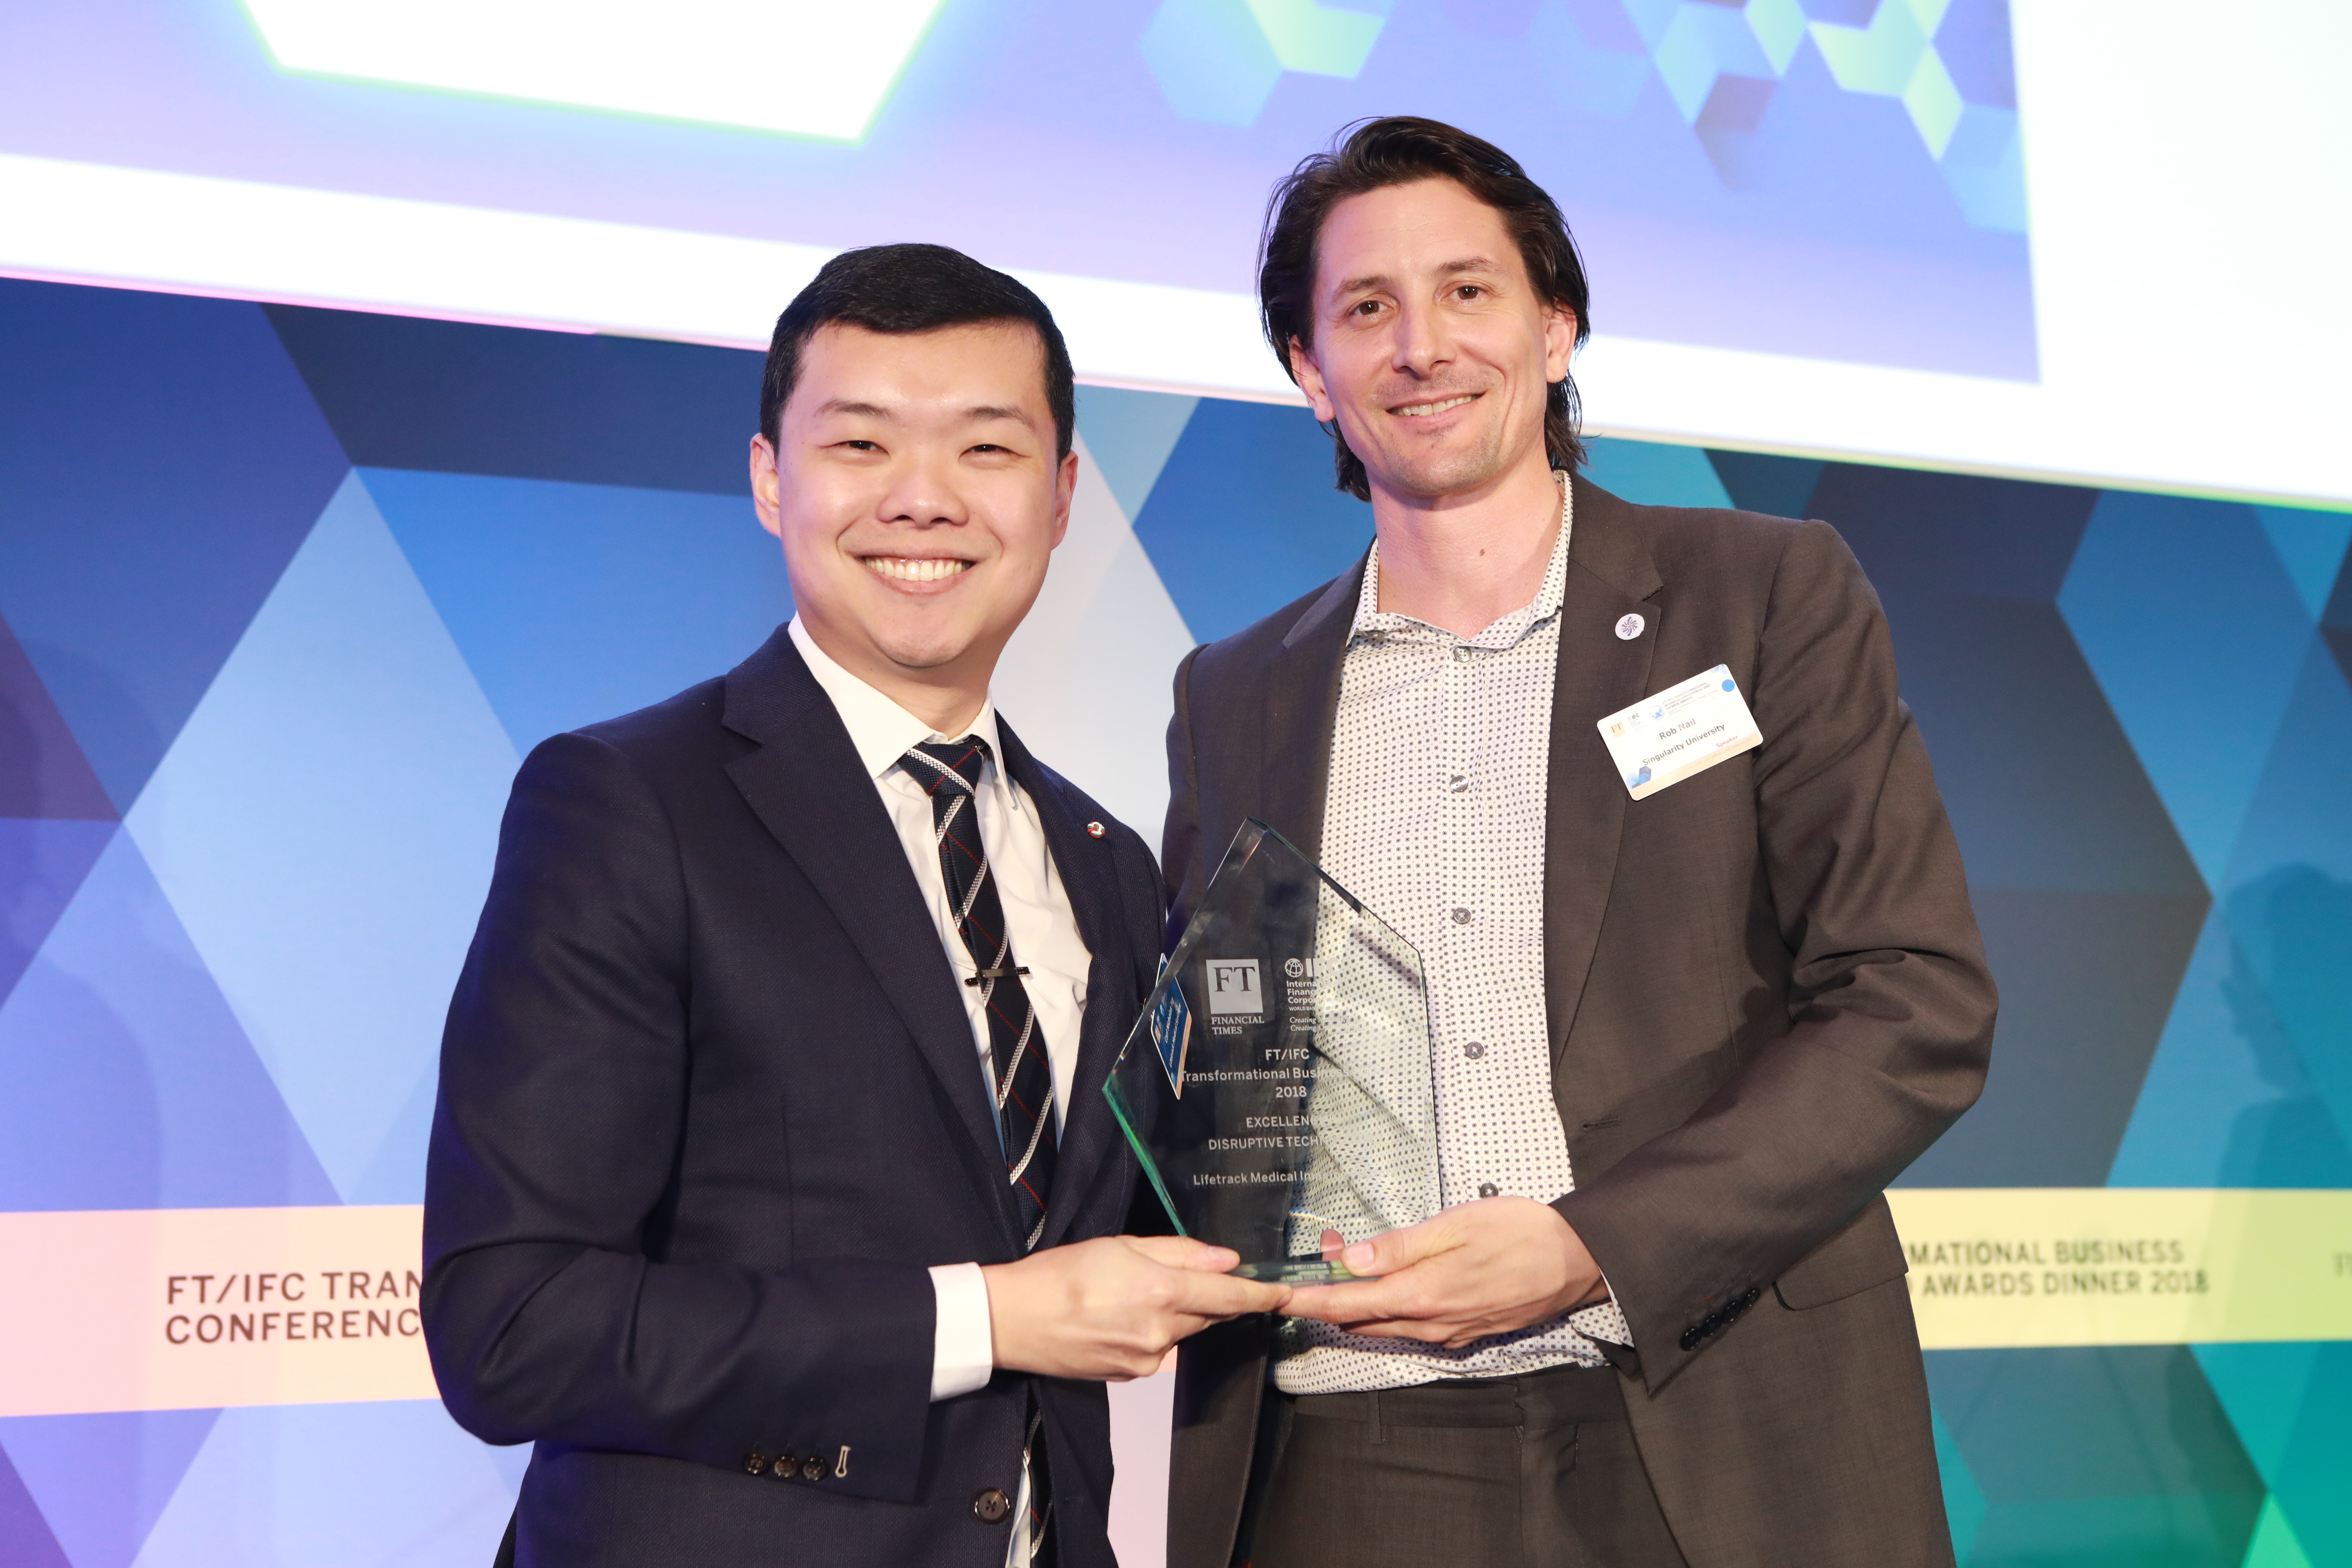 Lifetrack wins Excellence in Disruptive Technologies at 2018 FT/IFC's Transformational Business Conference and Awards